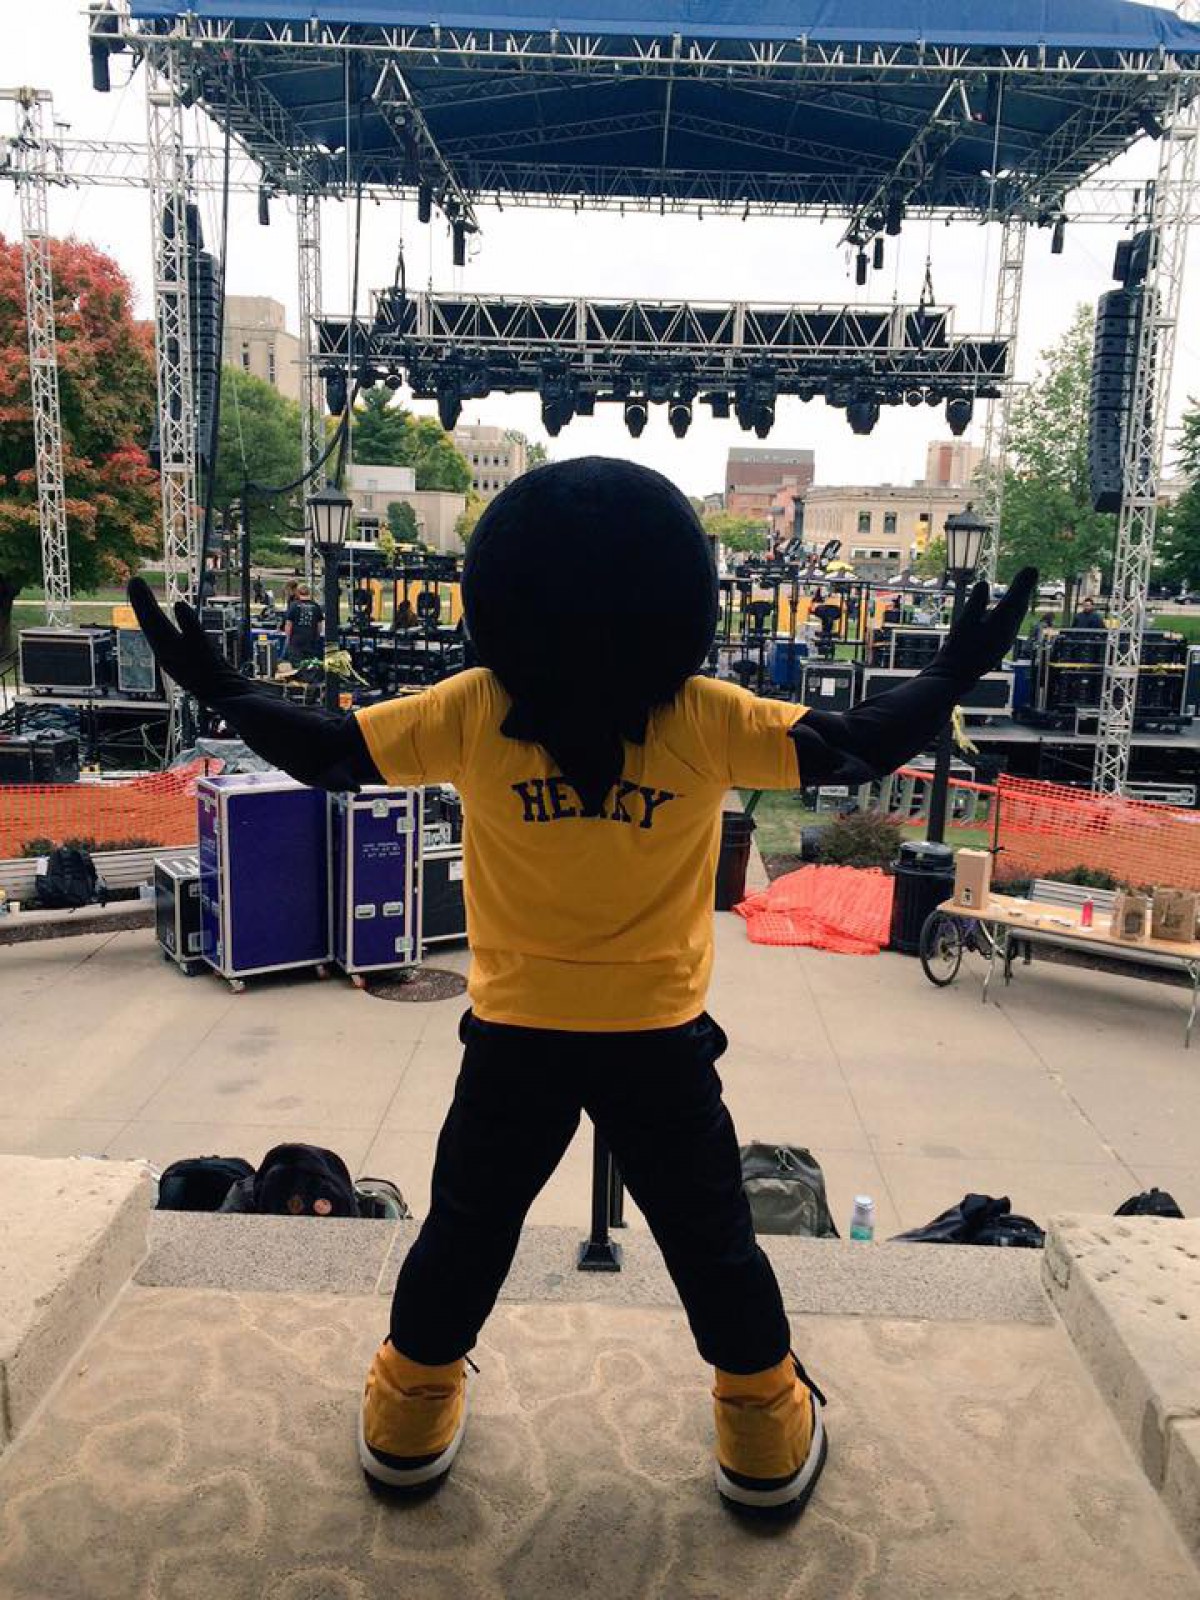 Herky on stage